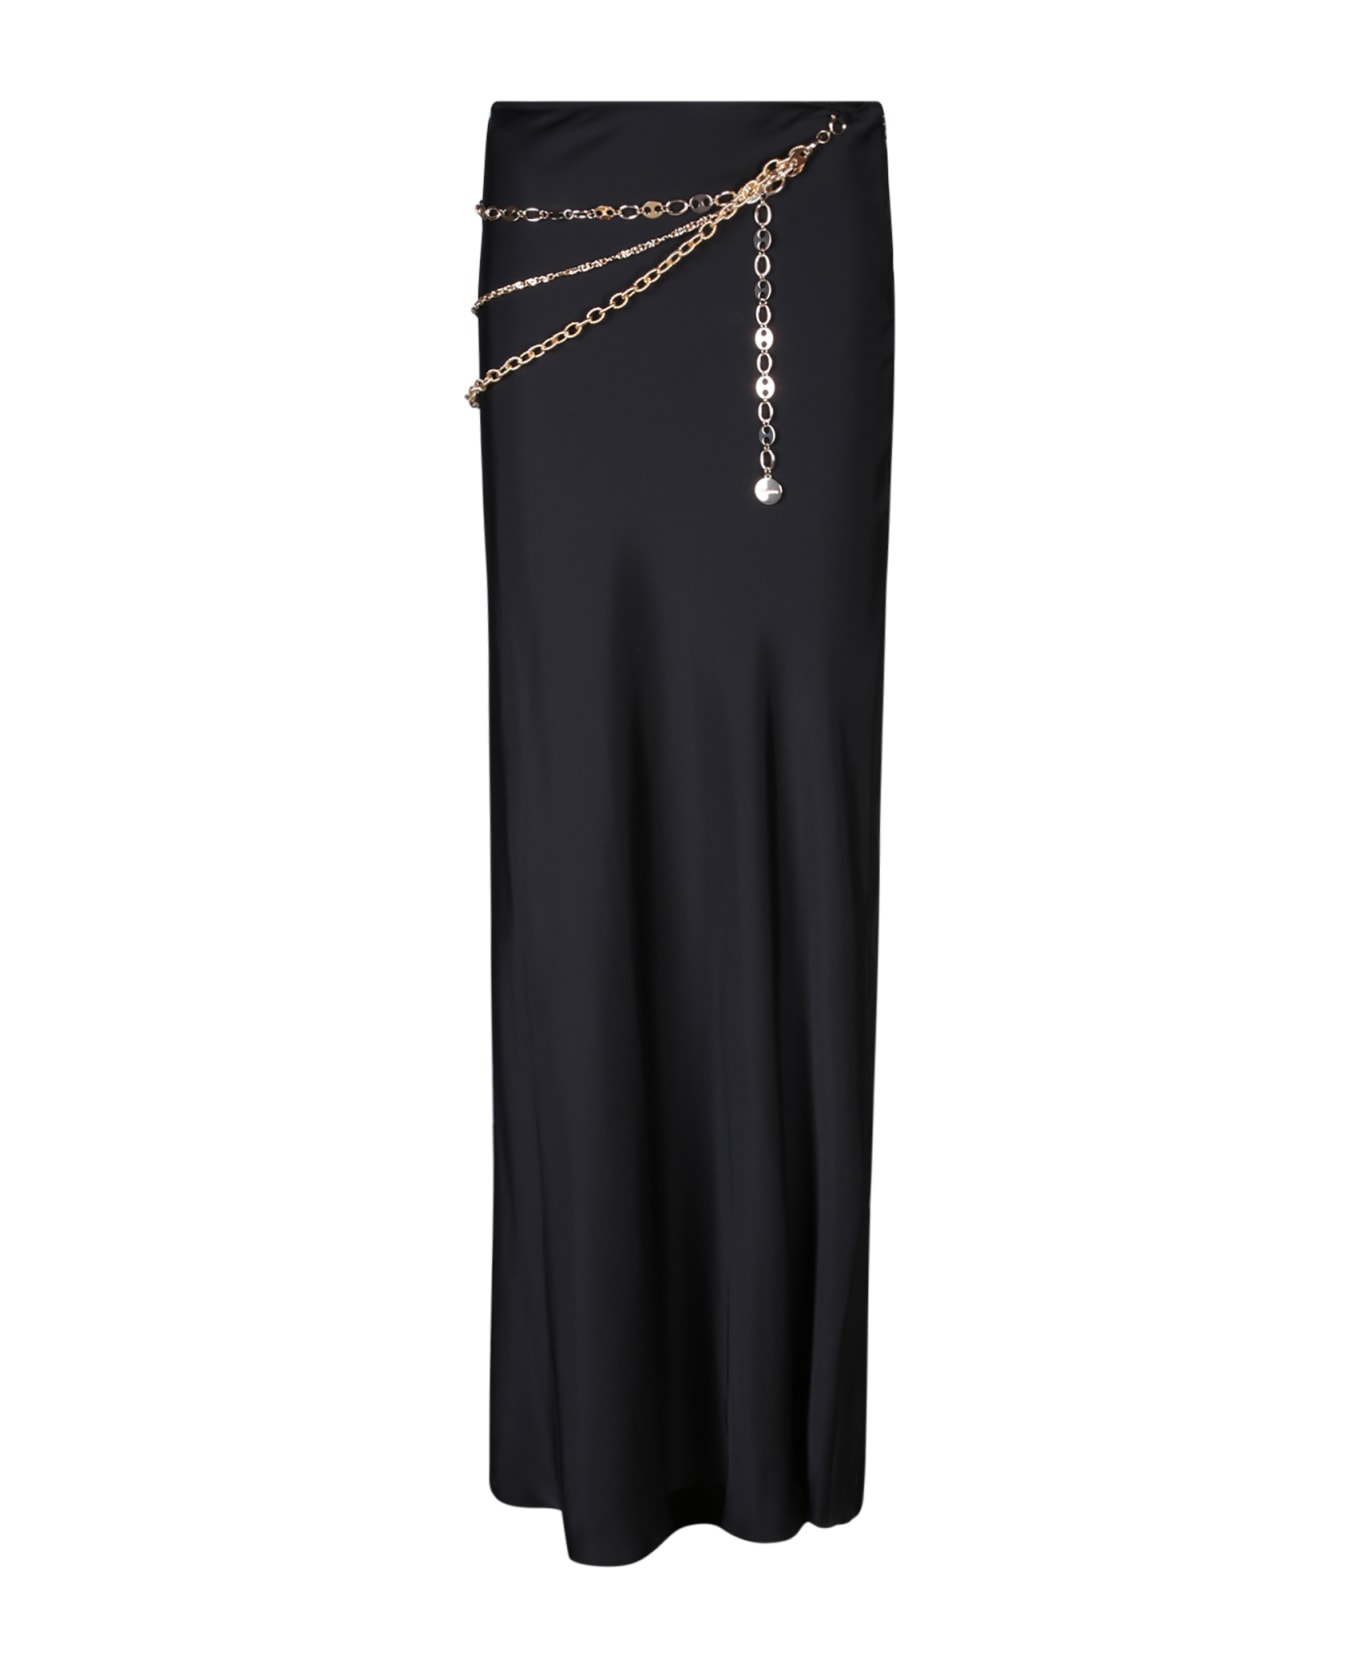 Paco Rabanne Black Satin Long Skirt With Chains - Black